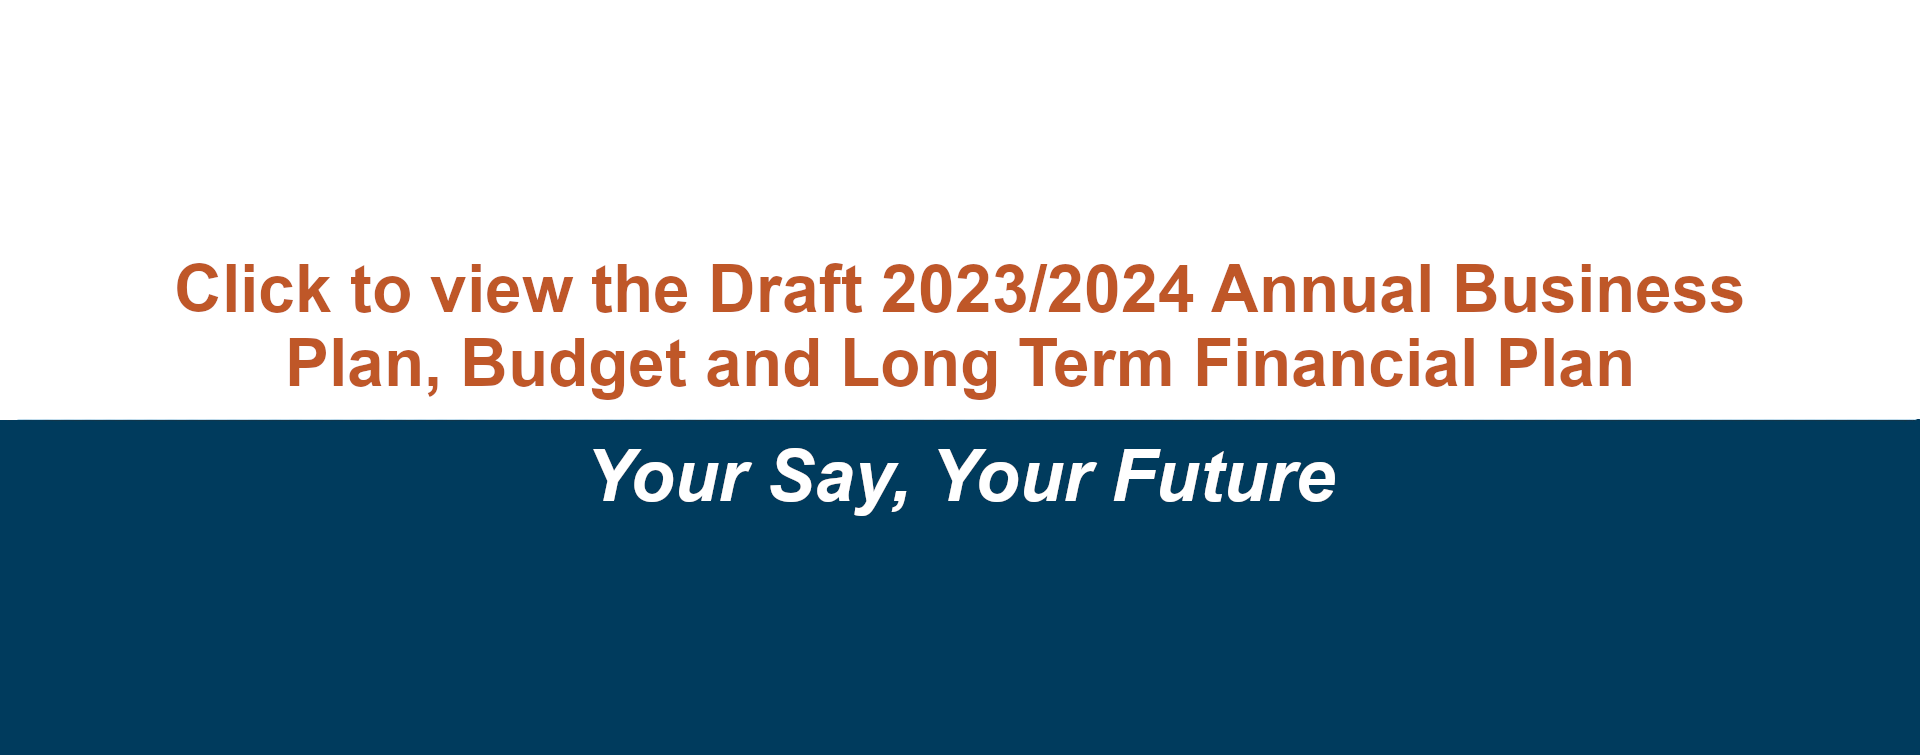 Draft 2023-2024 ABP, Budget, and LTFP banner